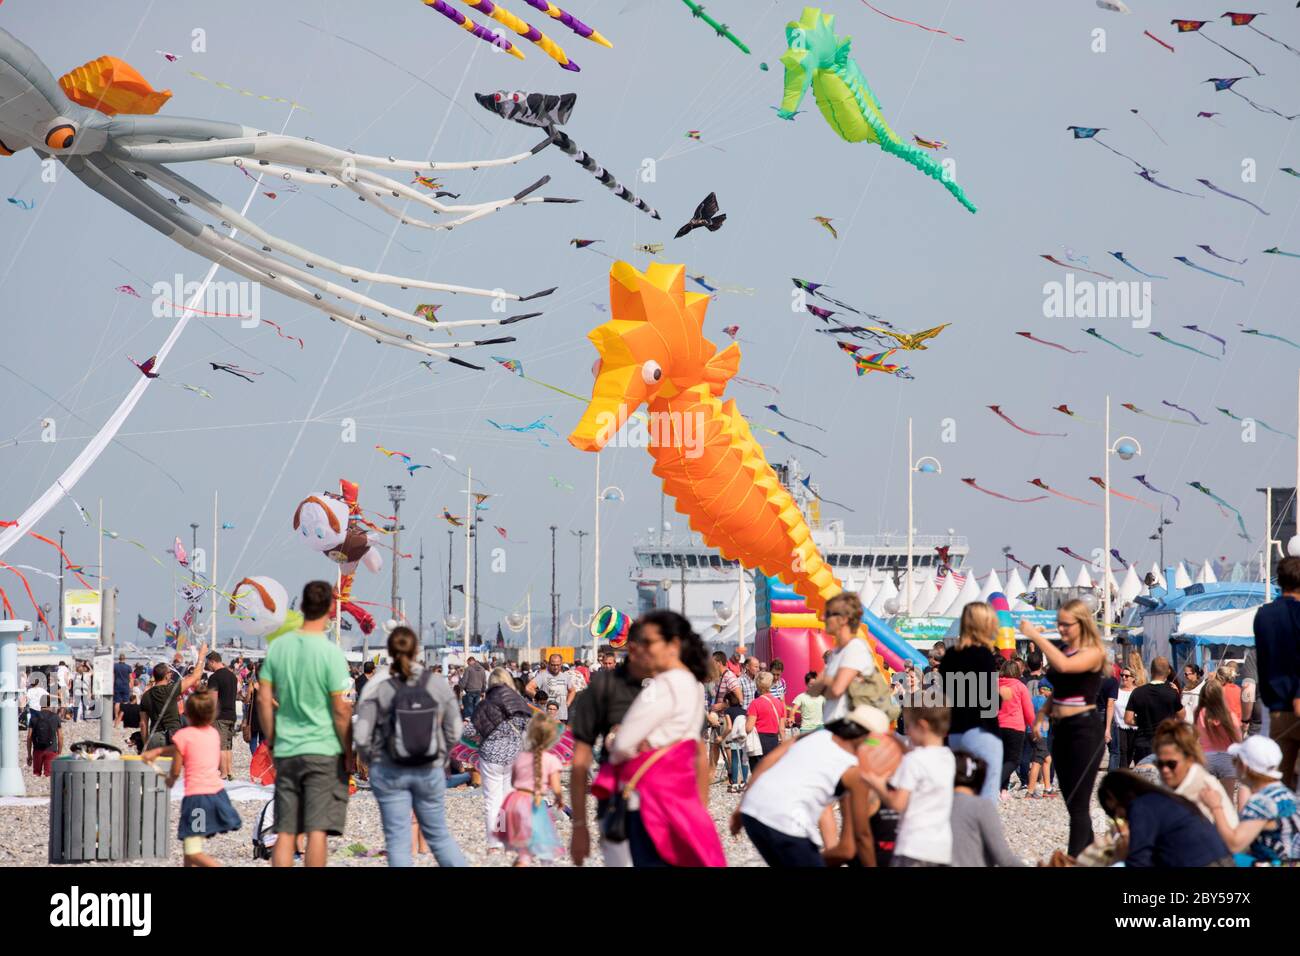 Kites from around the world are flown at the Dieppe Kite Festival, Dieppe, France. Stock Photo